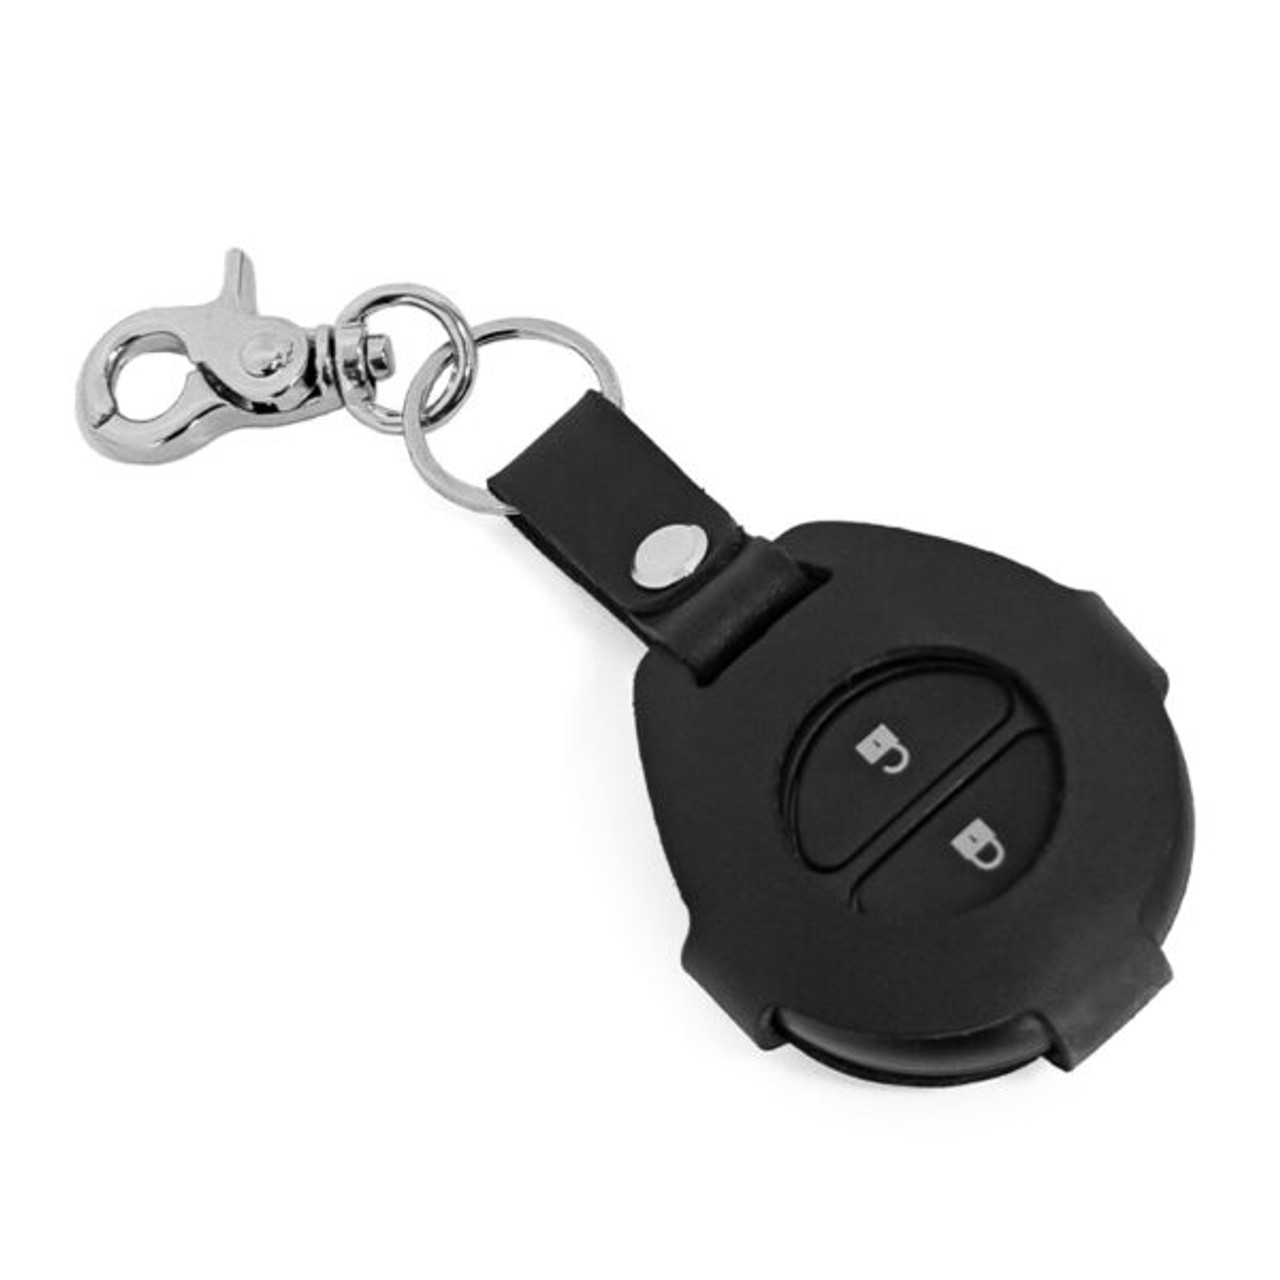 Buy Key Fob Cover Online In India -  India